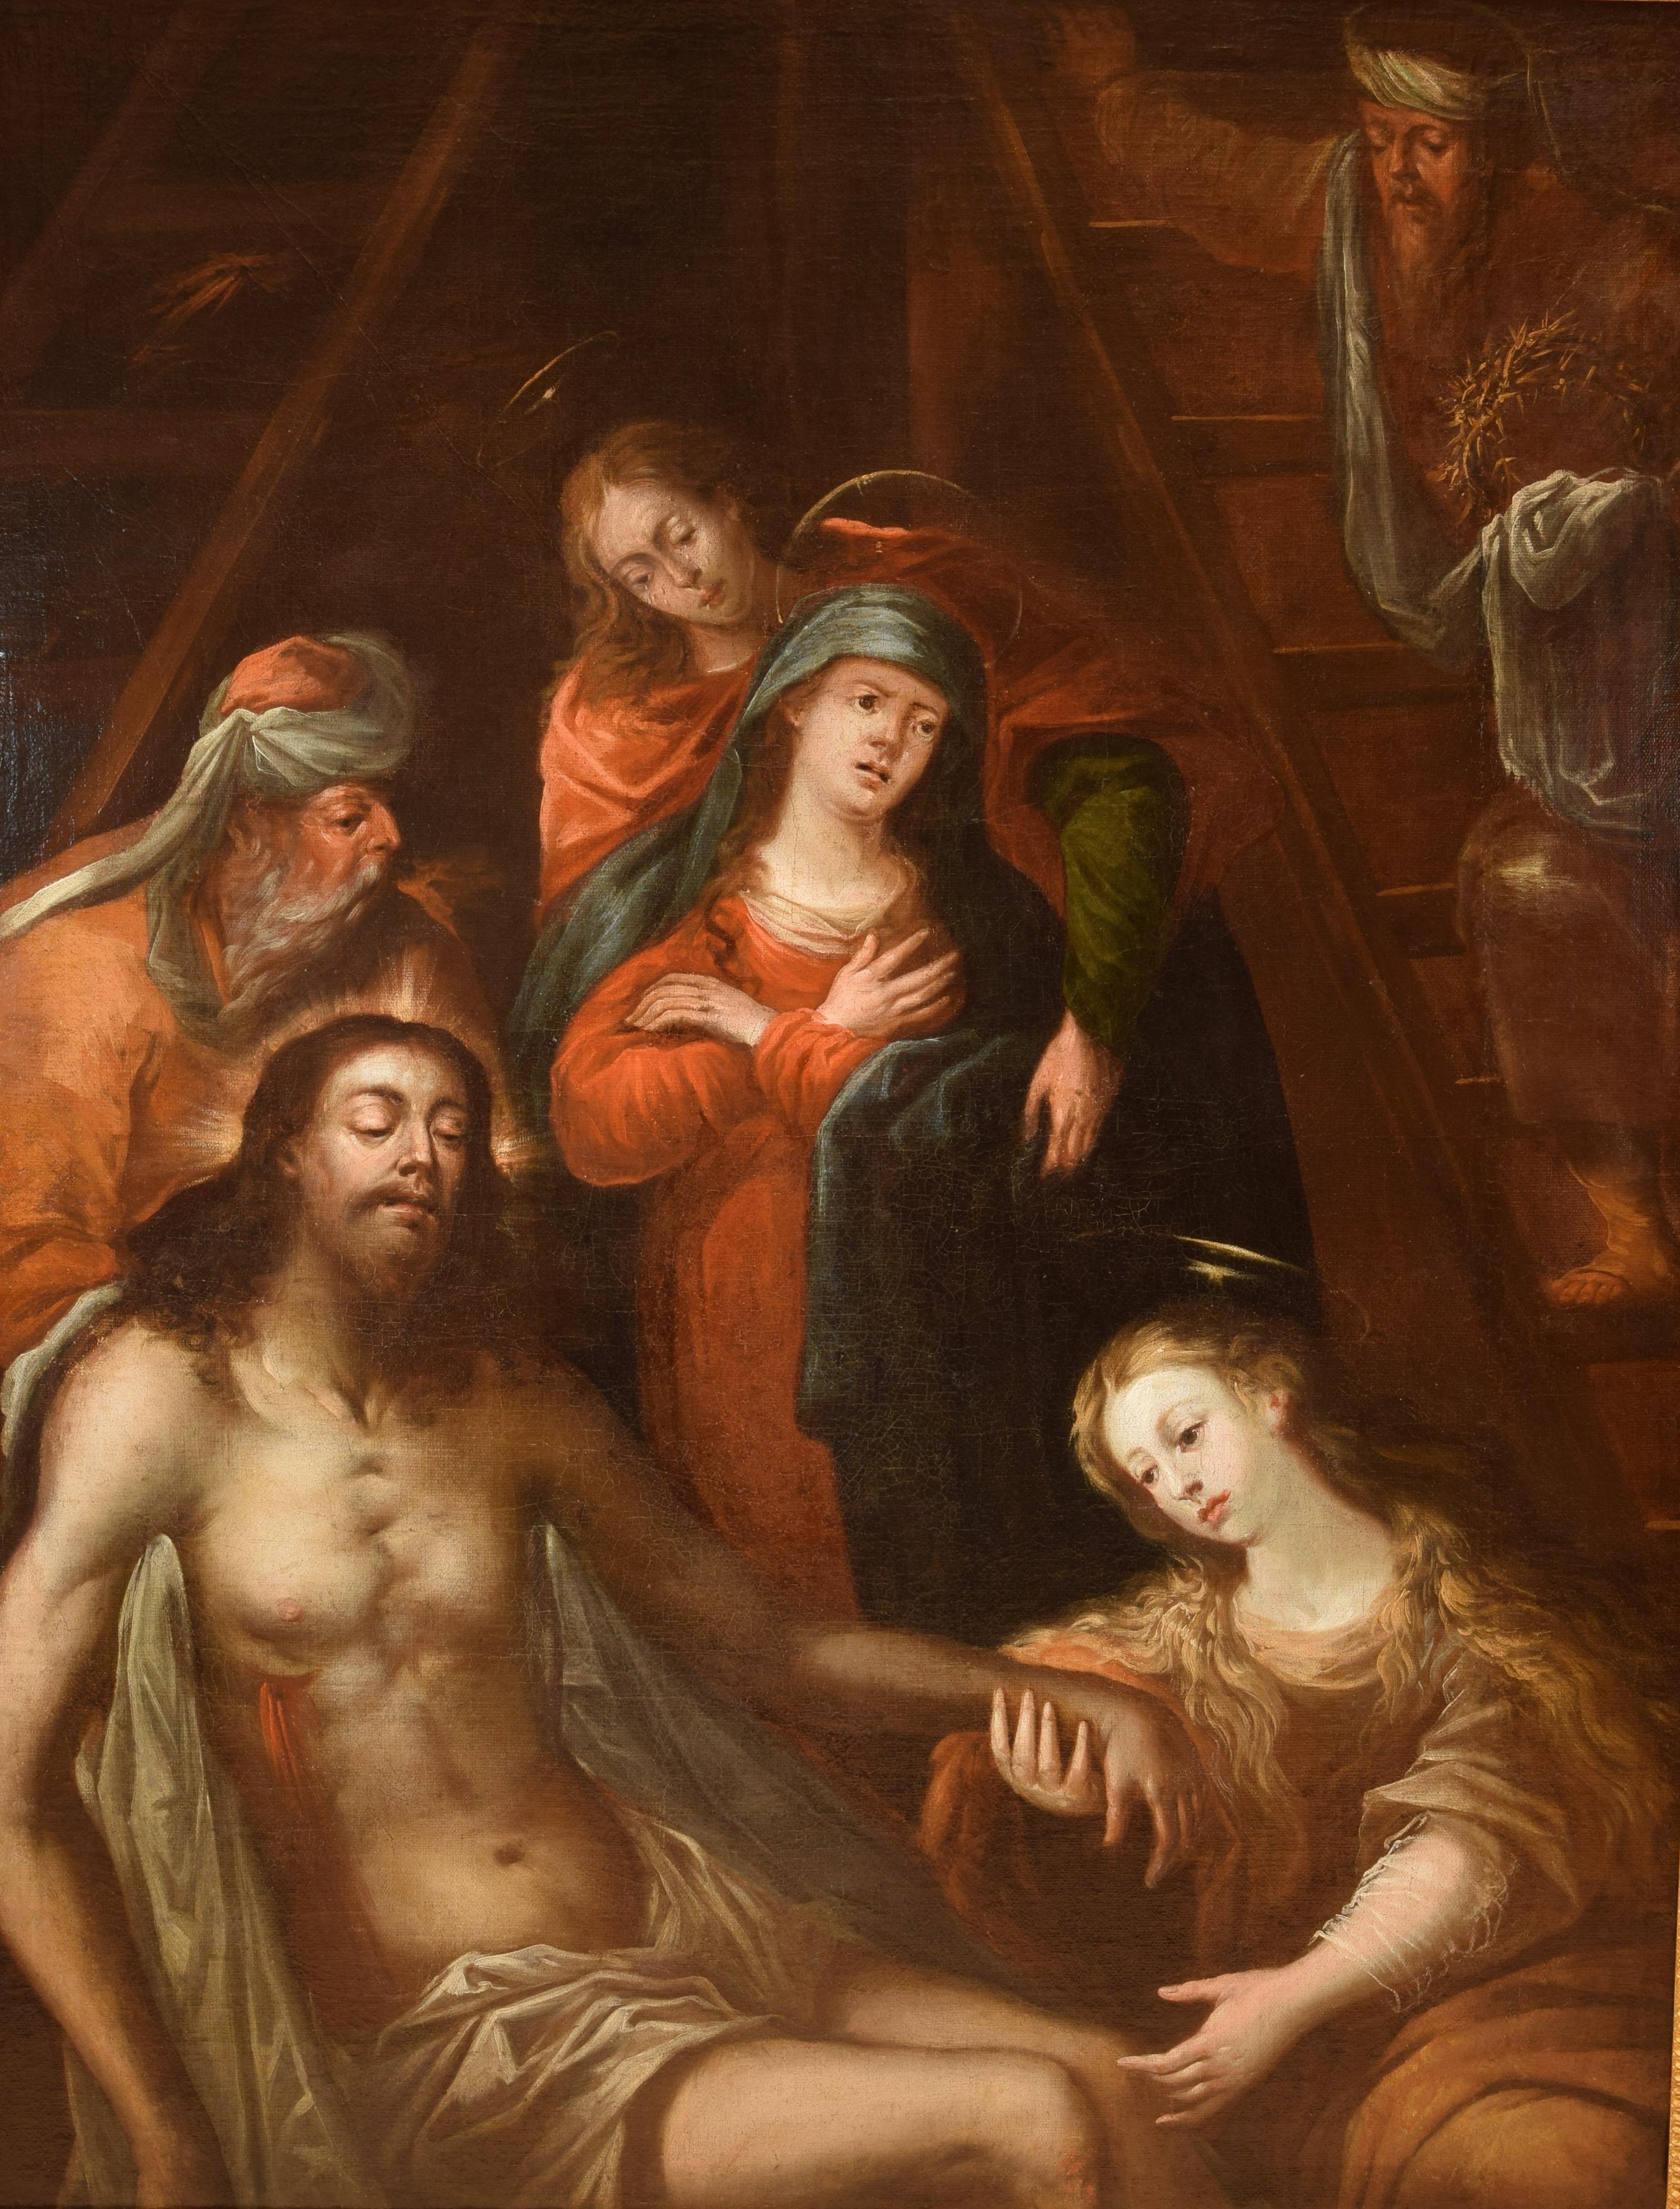 Descent oil on canvas. Flemish school, 17th century. 
In the foreground of the painting is located, in the center, the body of dead Christ, supported by a male figure and with Mary Magdalene taking one of his hands; in the background, the Virgin